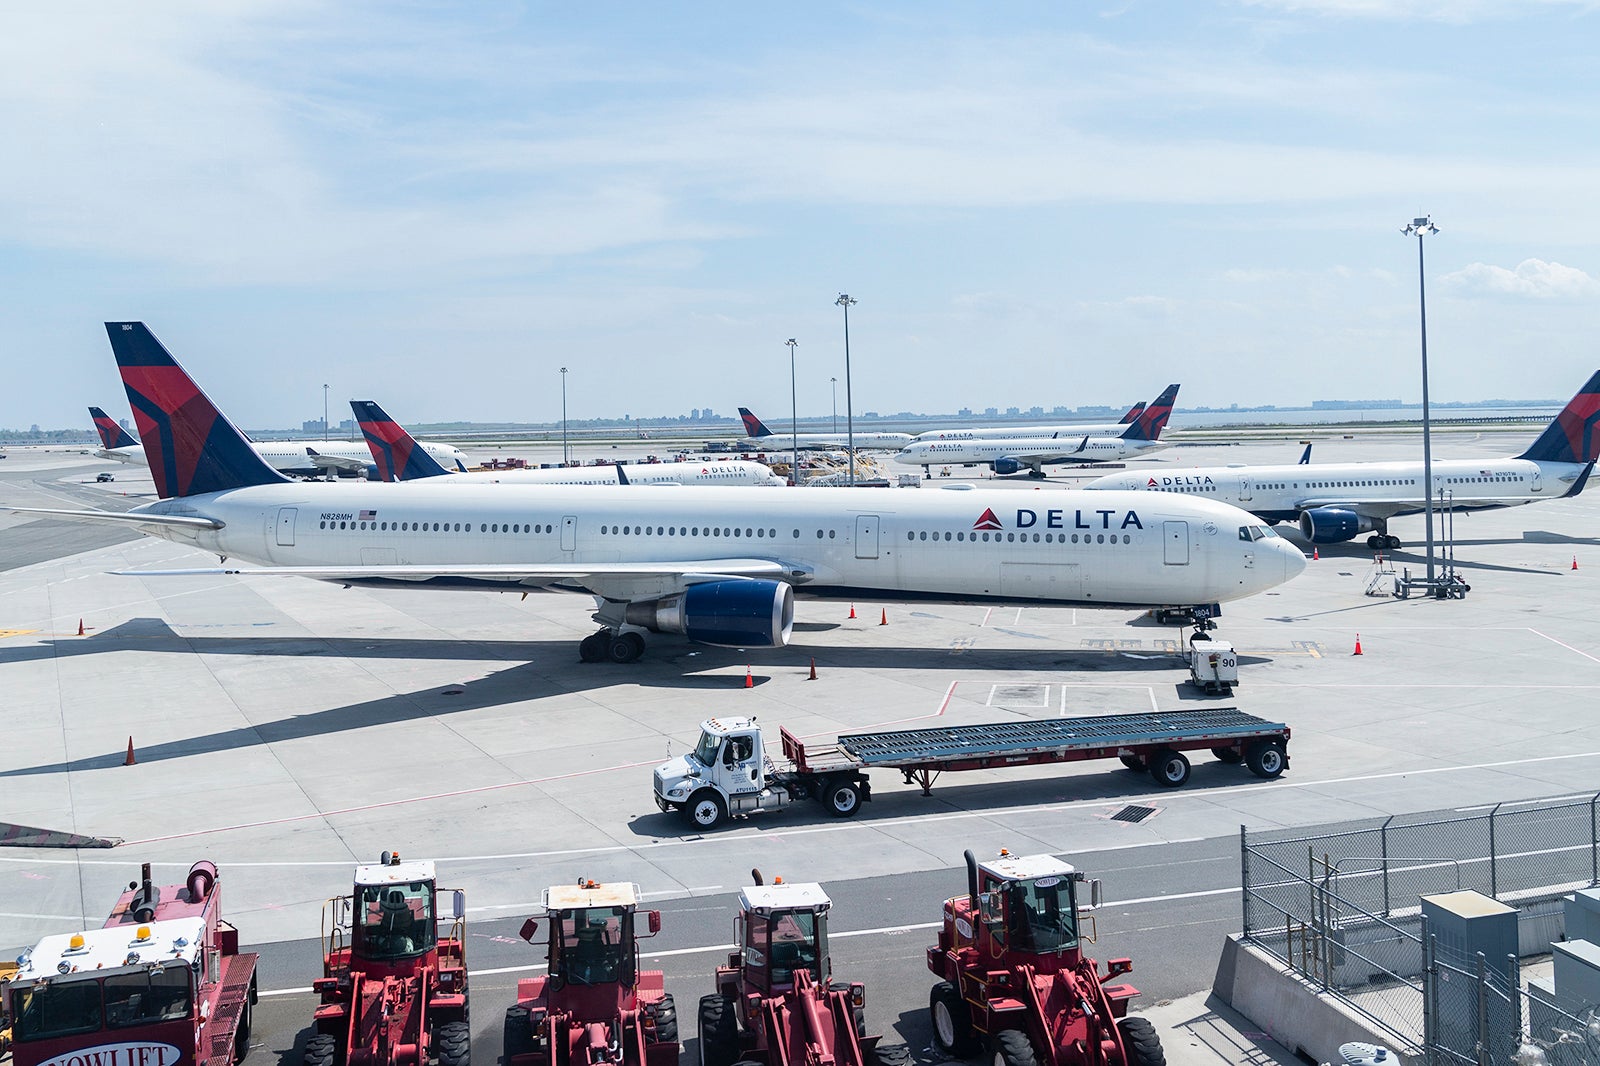 Idle airplanes of Delta airline seen during COVID-19